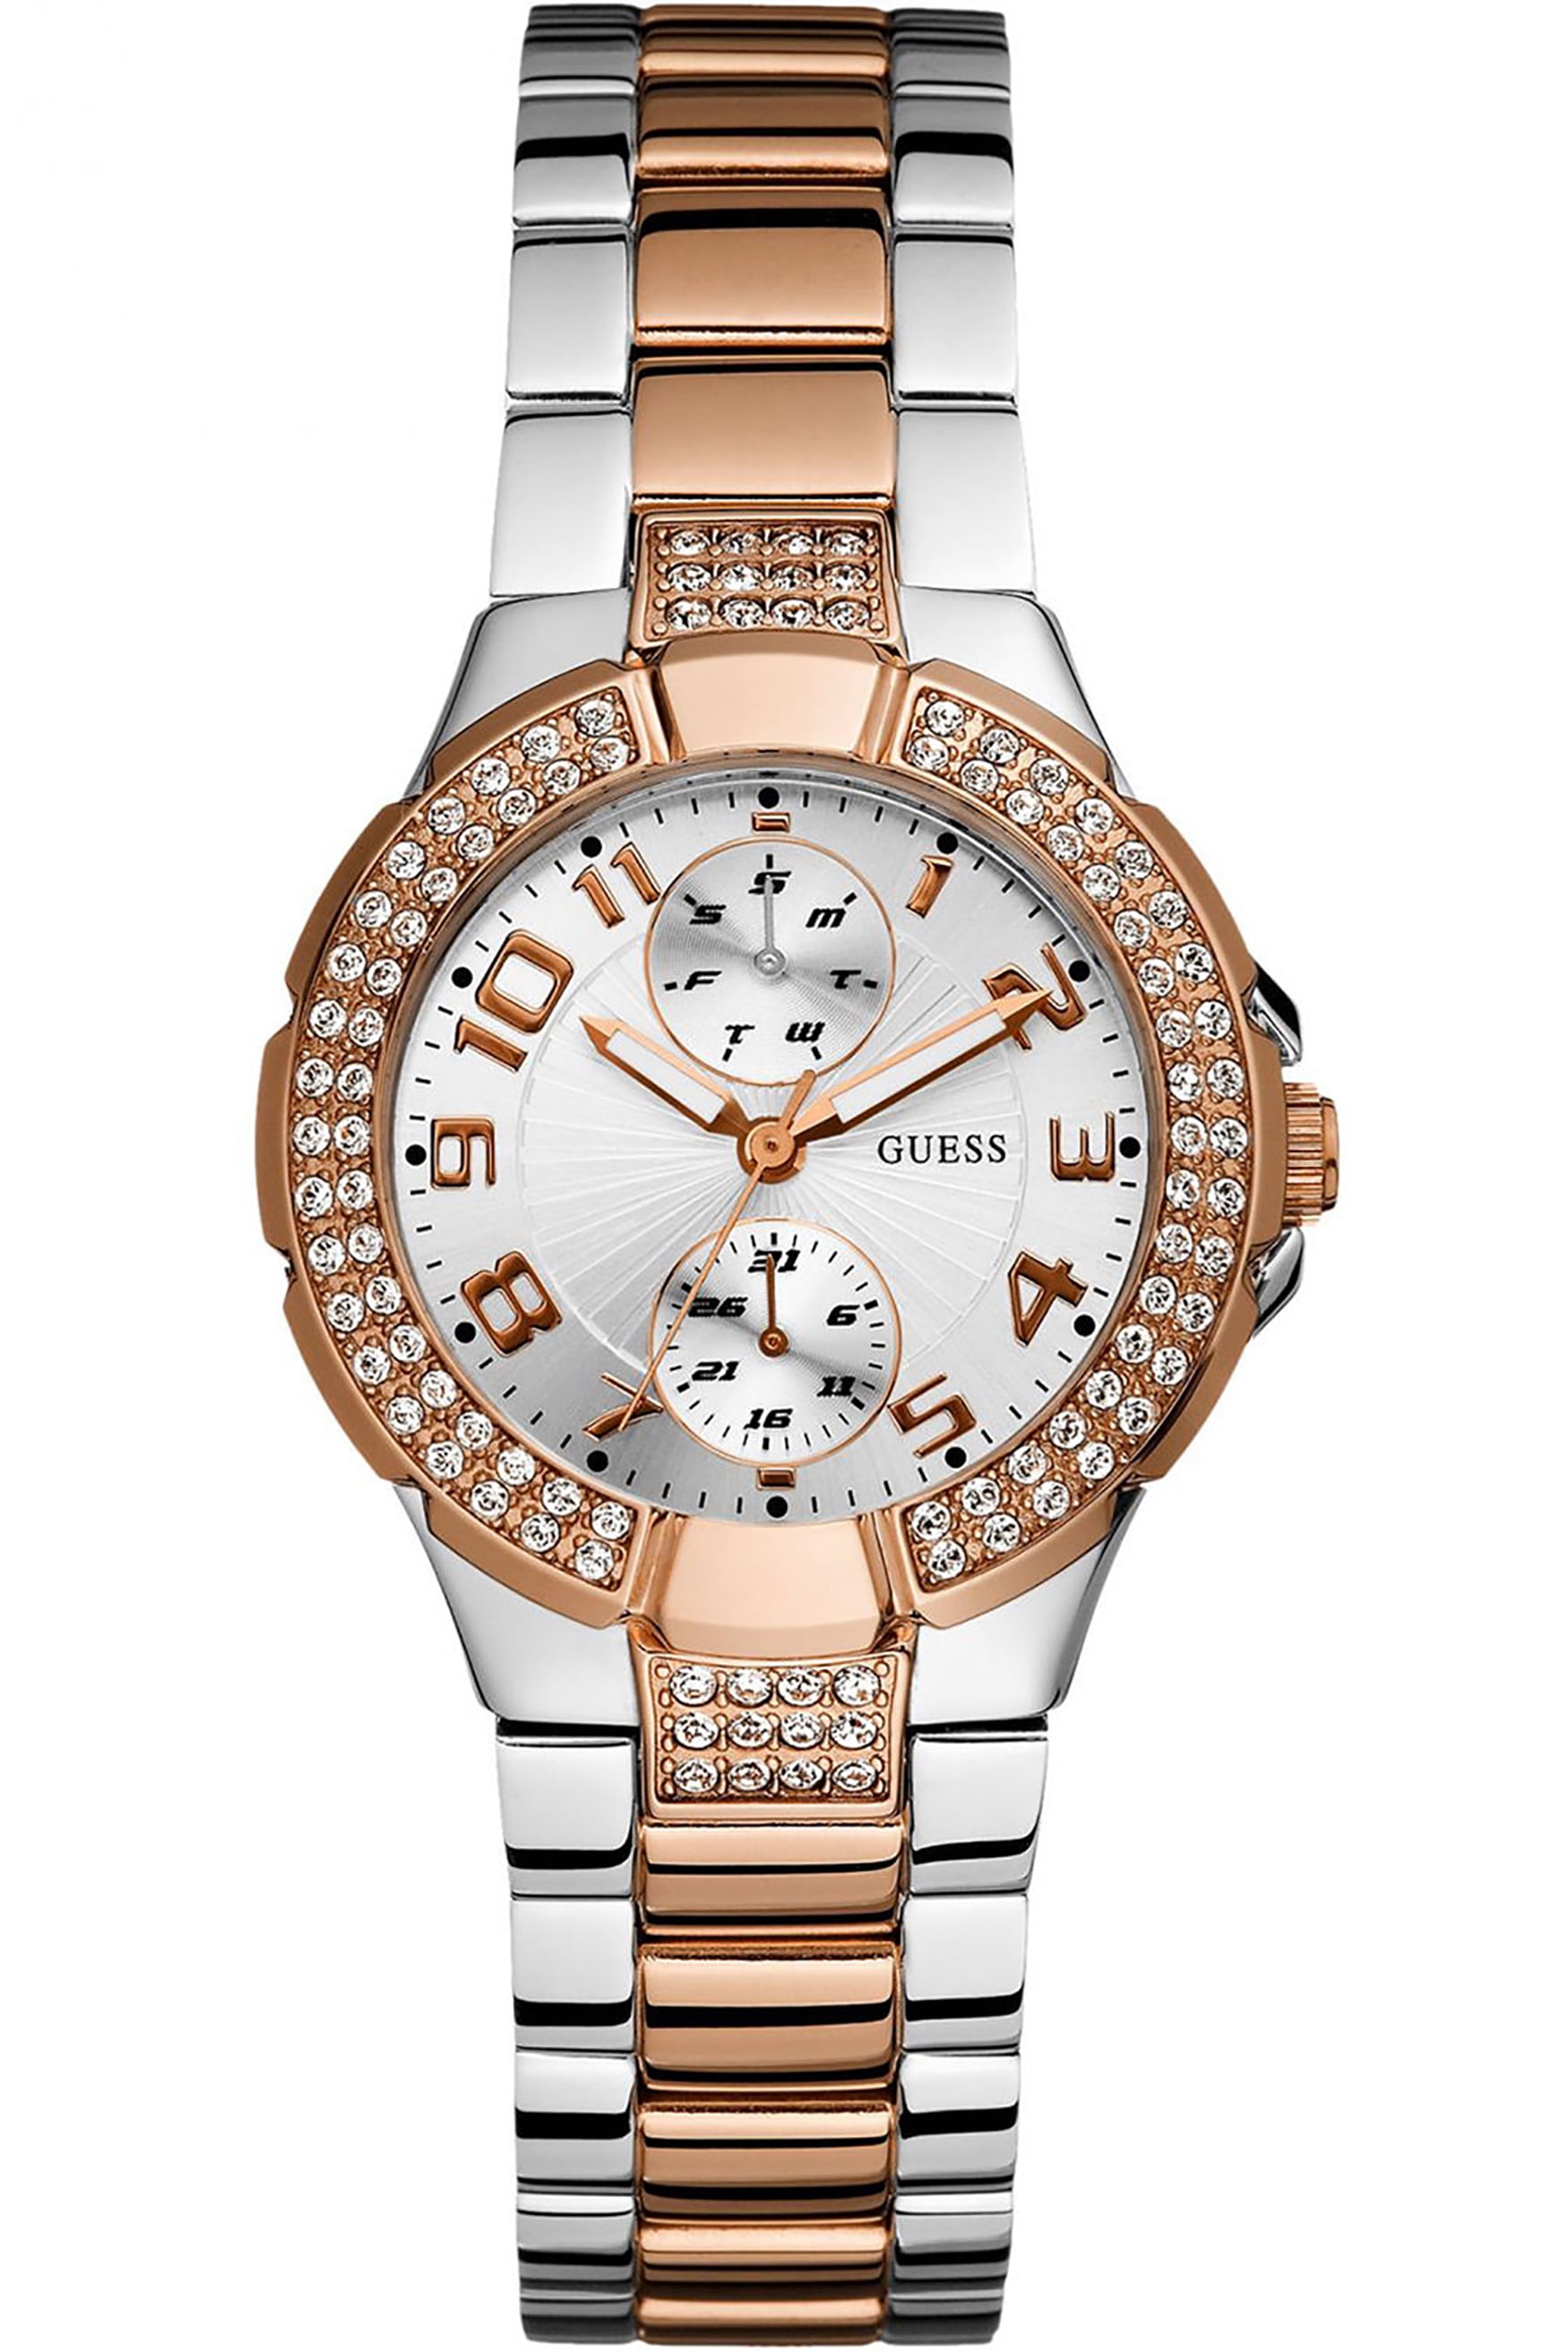 ☆GUESS ゲス☆Crystal Accented Watch クリスタル 腕時計 (Guess